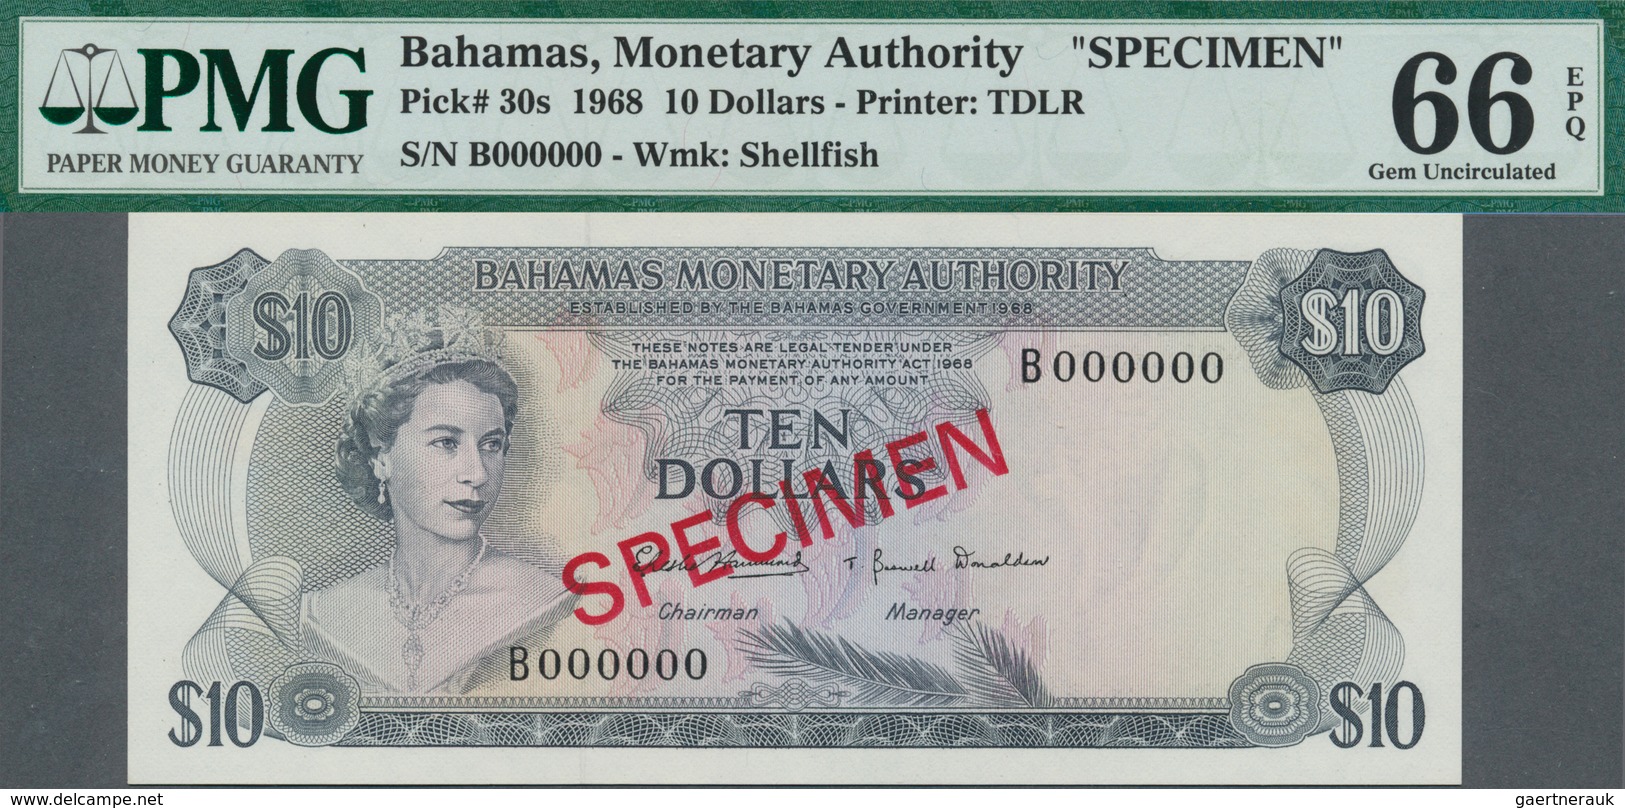 Bahamas: set of 8 SPECIMEN banknotes from 1/2 Dollar 1968 to 100 Dollars 1968 Specimen P. 26s-33s, a